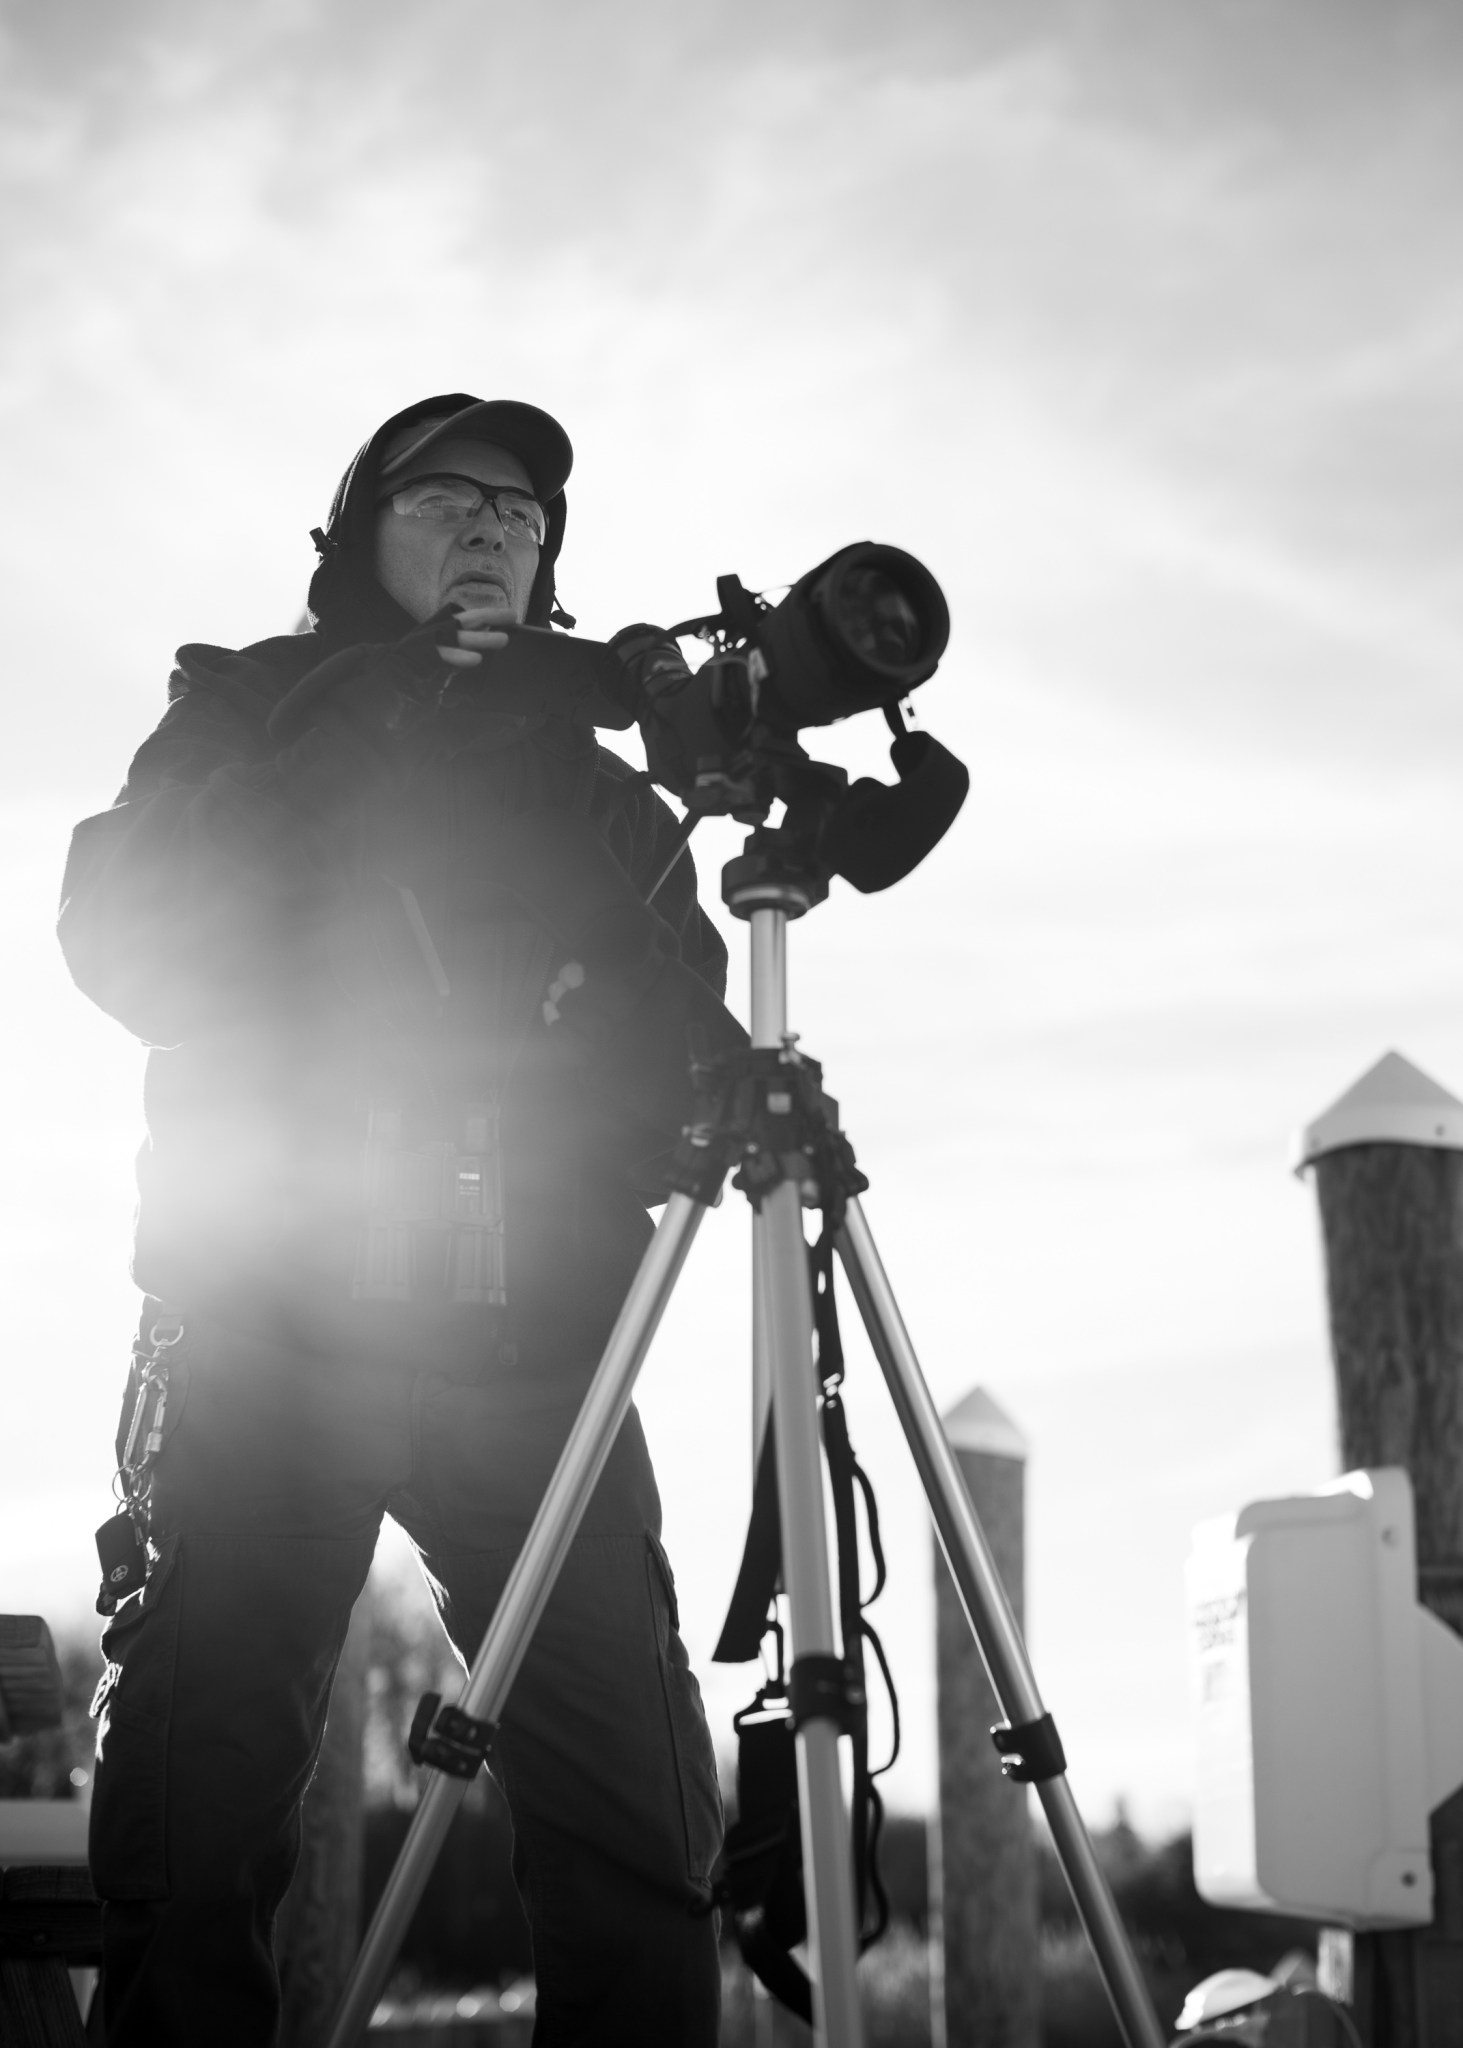 Black and white image of a man operating a camera on a tripod wearing safety glasses, a jacket, pants, and a hat. 